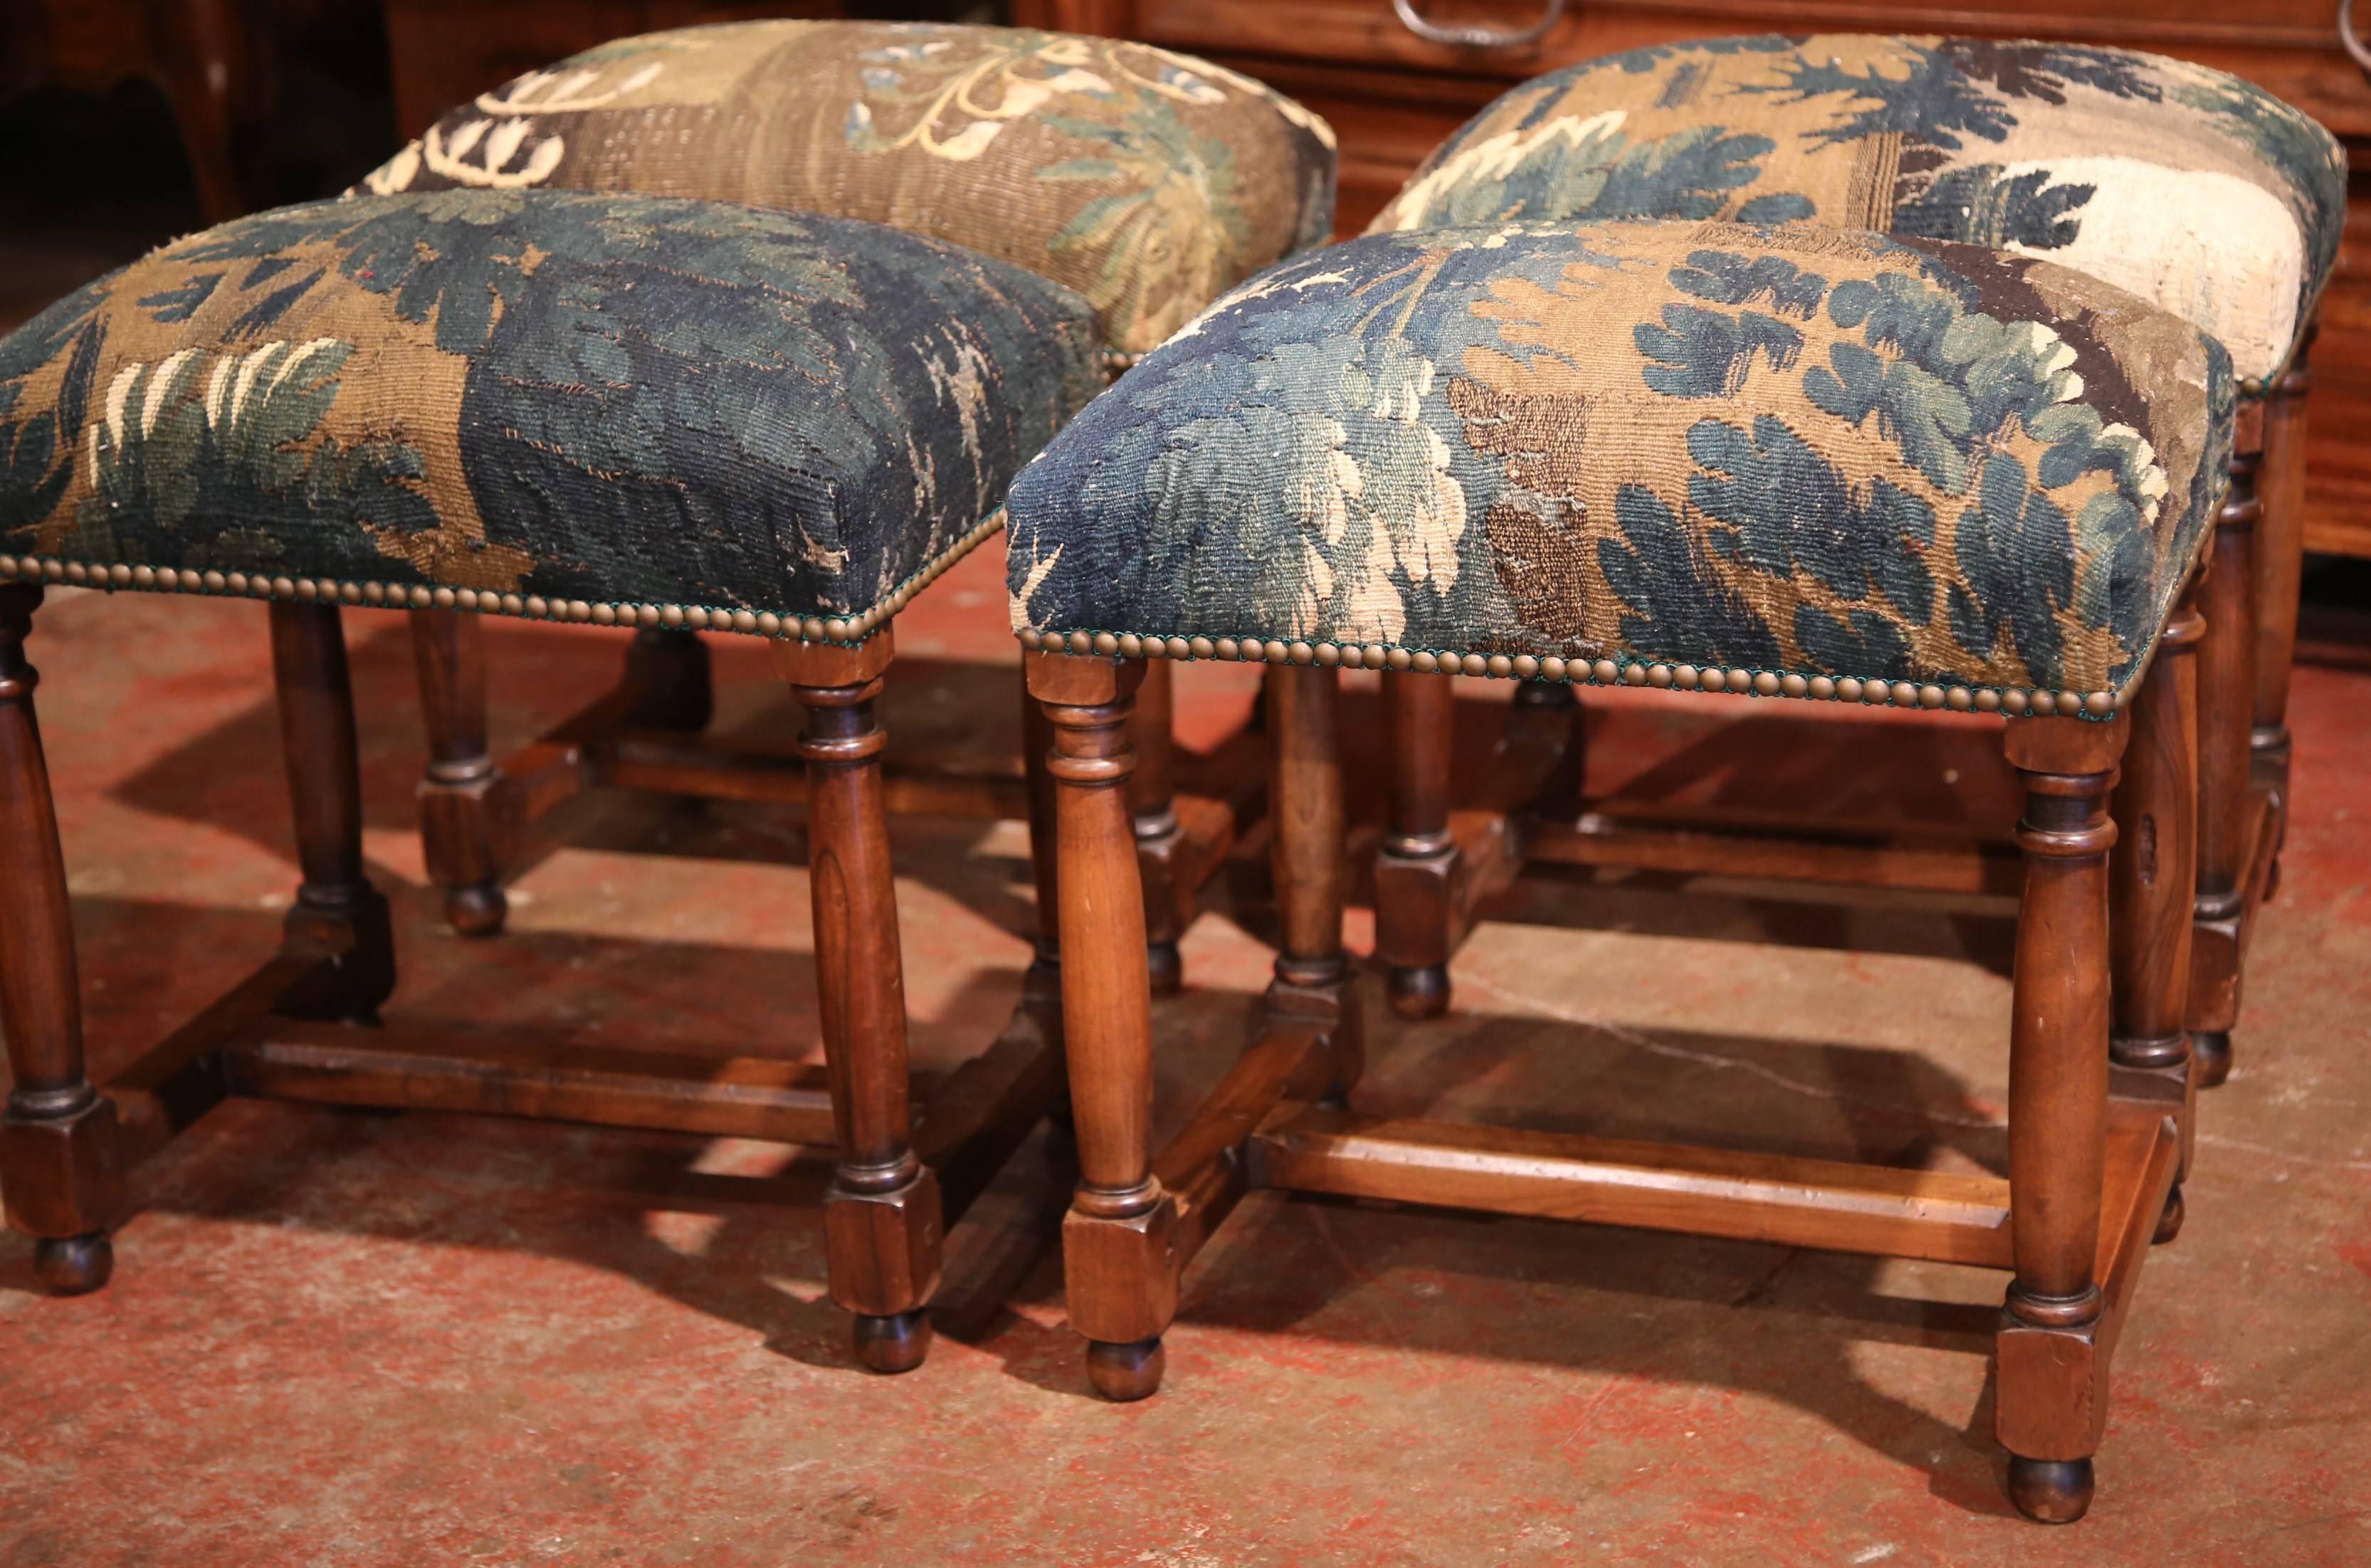 This exceptional suite of four Louis XIII fruitwood stools was crafted in Southern France, circa 1890. All four antique pieces are upholstered with 19th century Aubusson verdure tapestry in a classic brown, blue, green and beige color palette. The